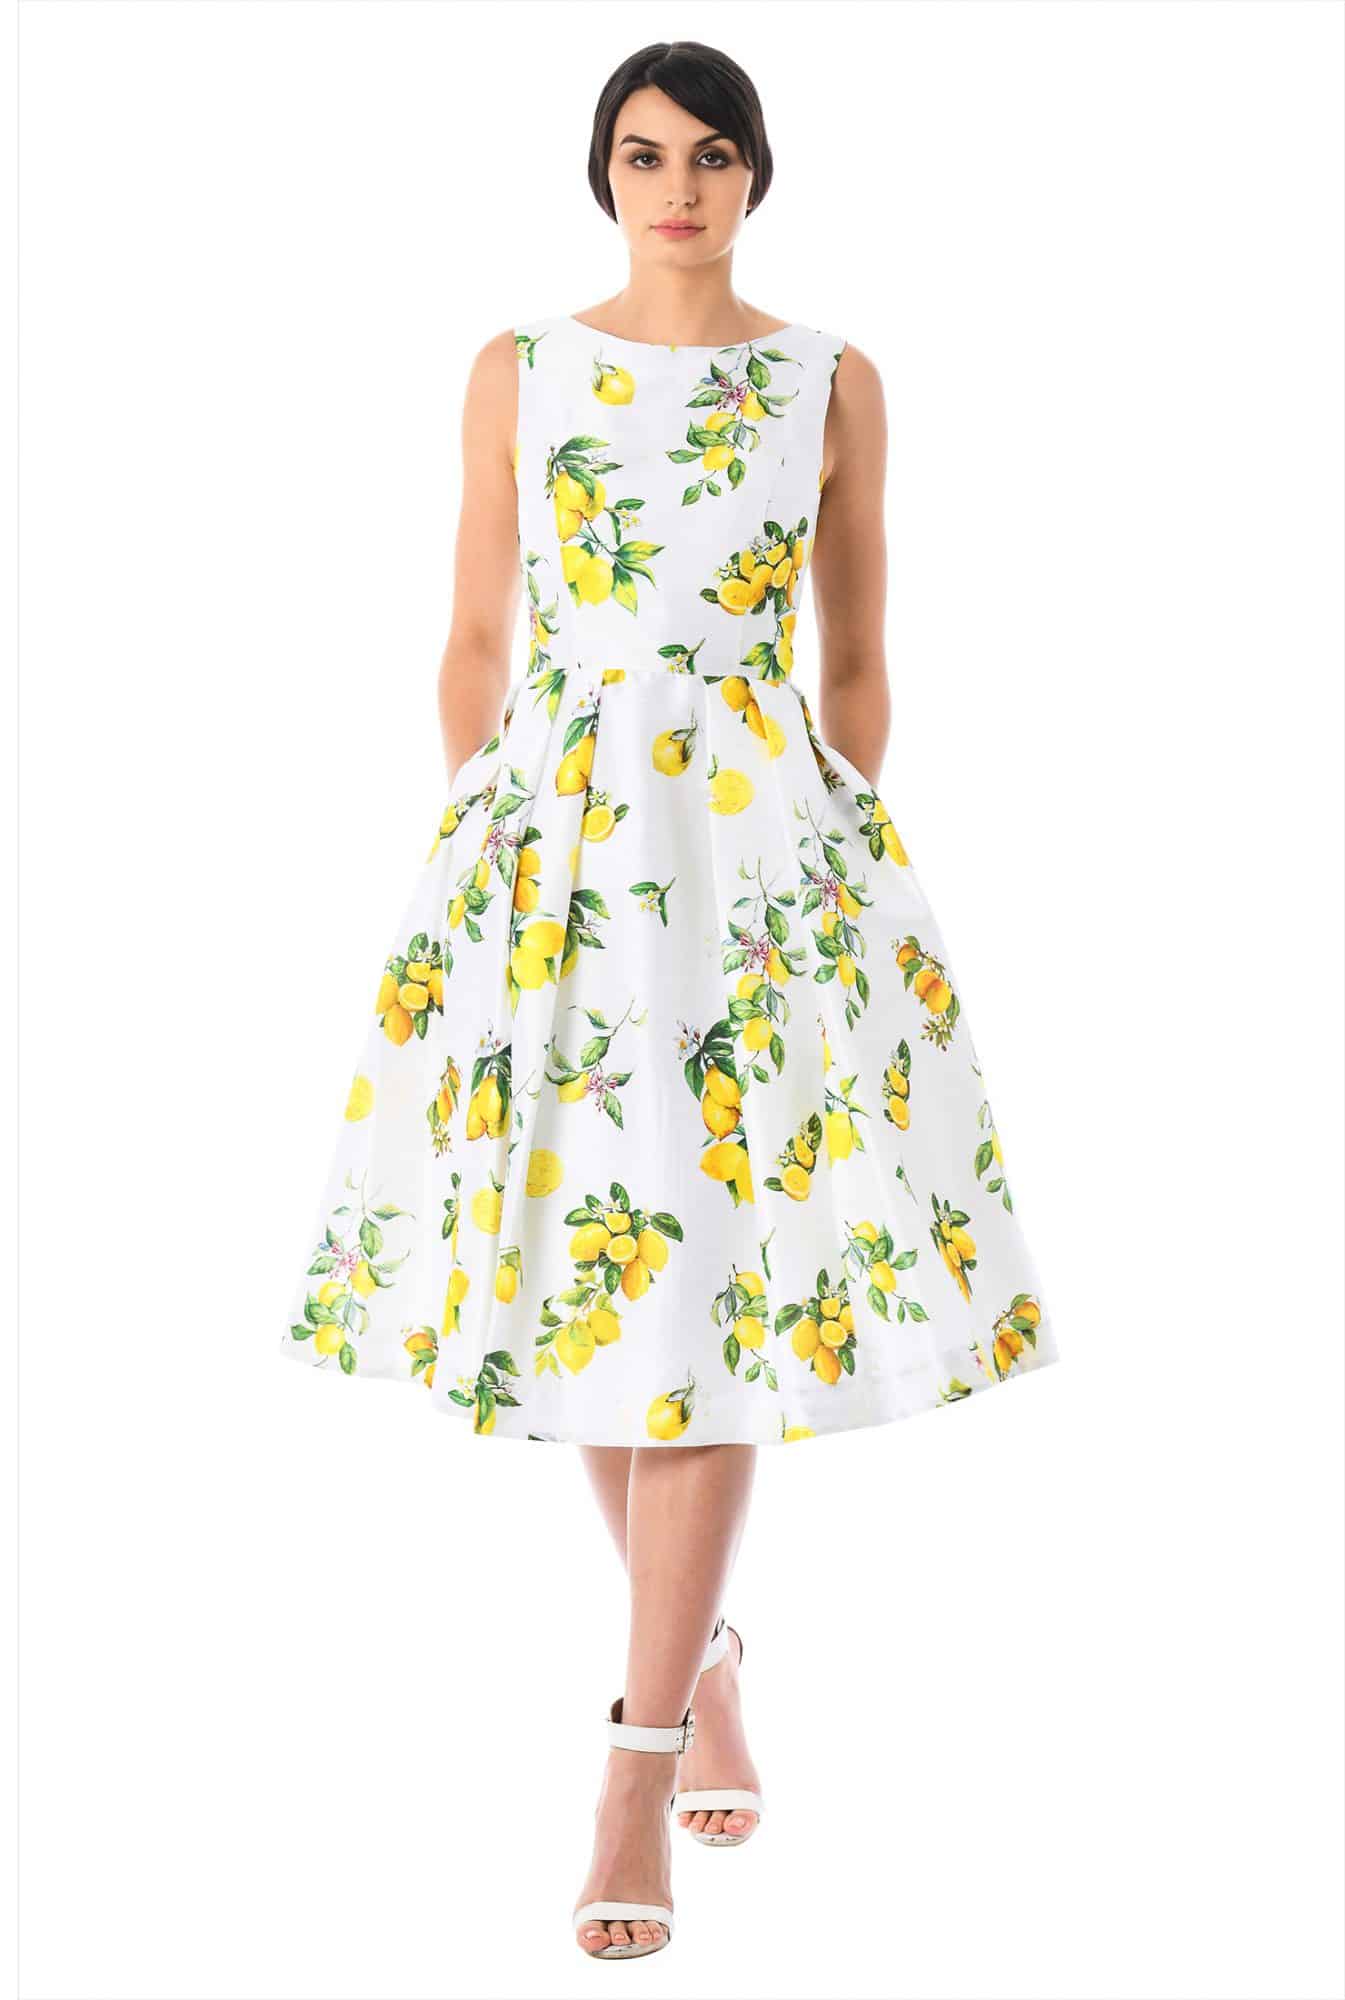 From Church To Wedding To Black Tie Event: Getting Dressy. A white summer dress with lemon and leaves.